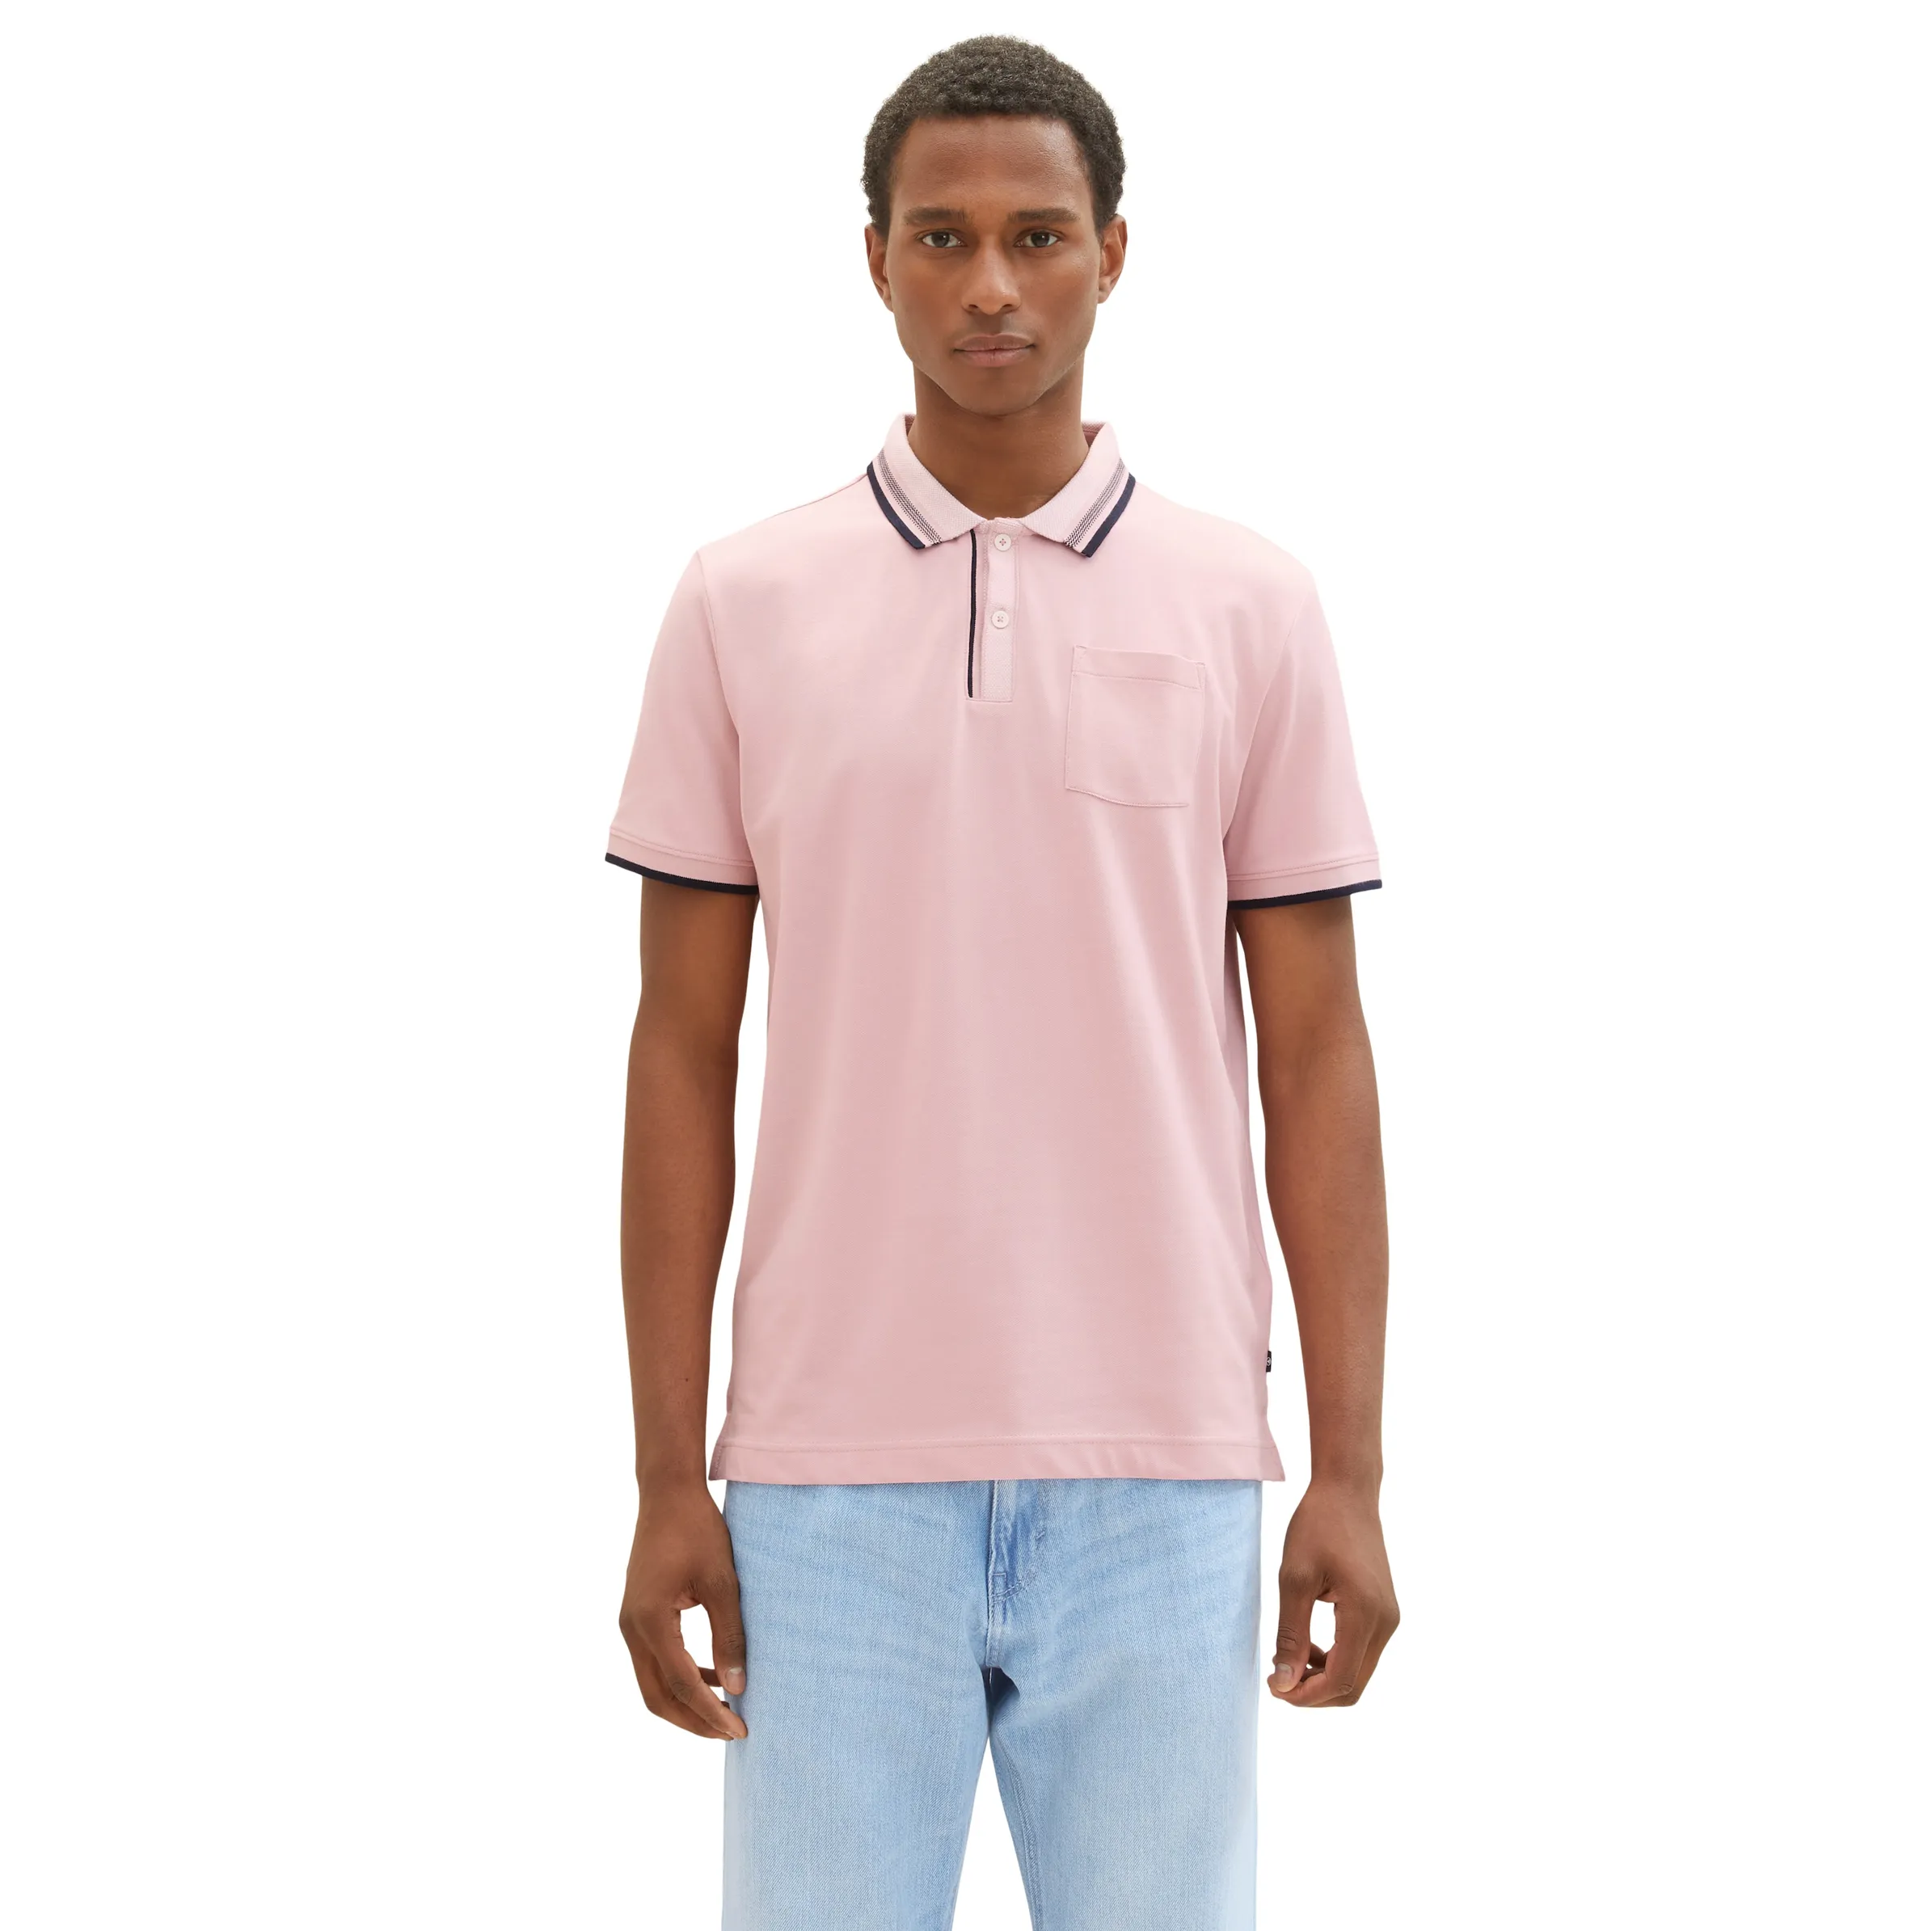 Tom Tailor 1036370 detailed polo Pink 880572 11055 1